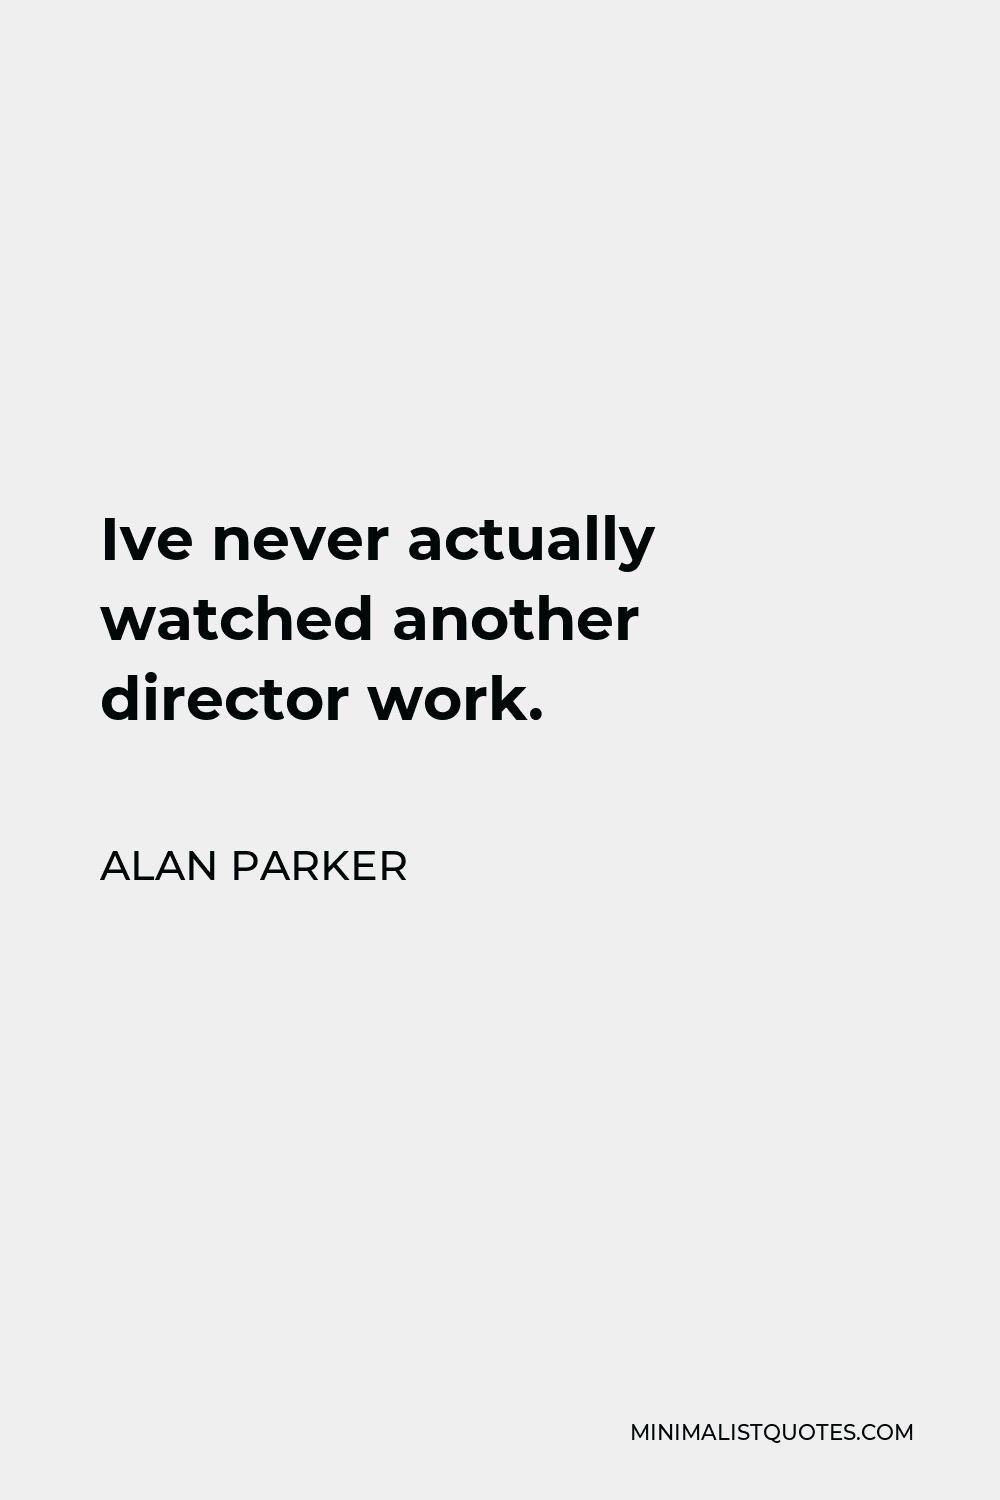 Alan Parker Quote - Ive never actually watched another director work.